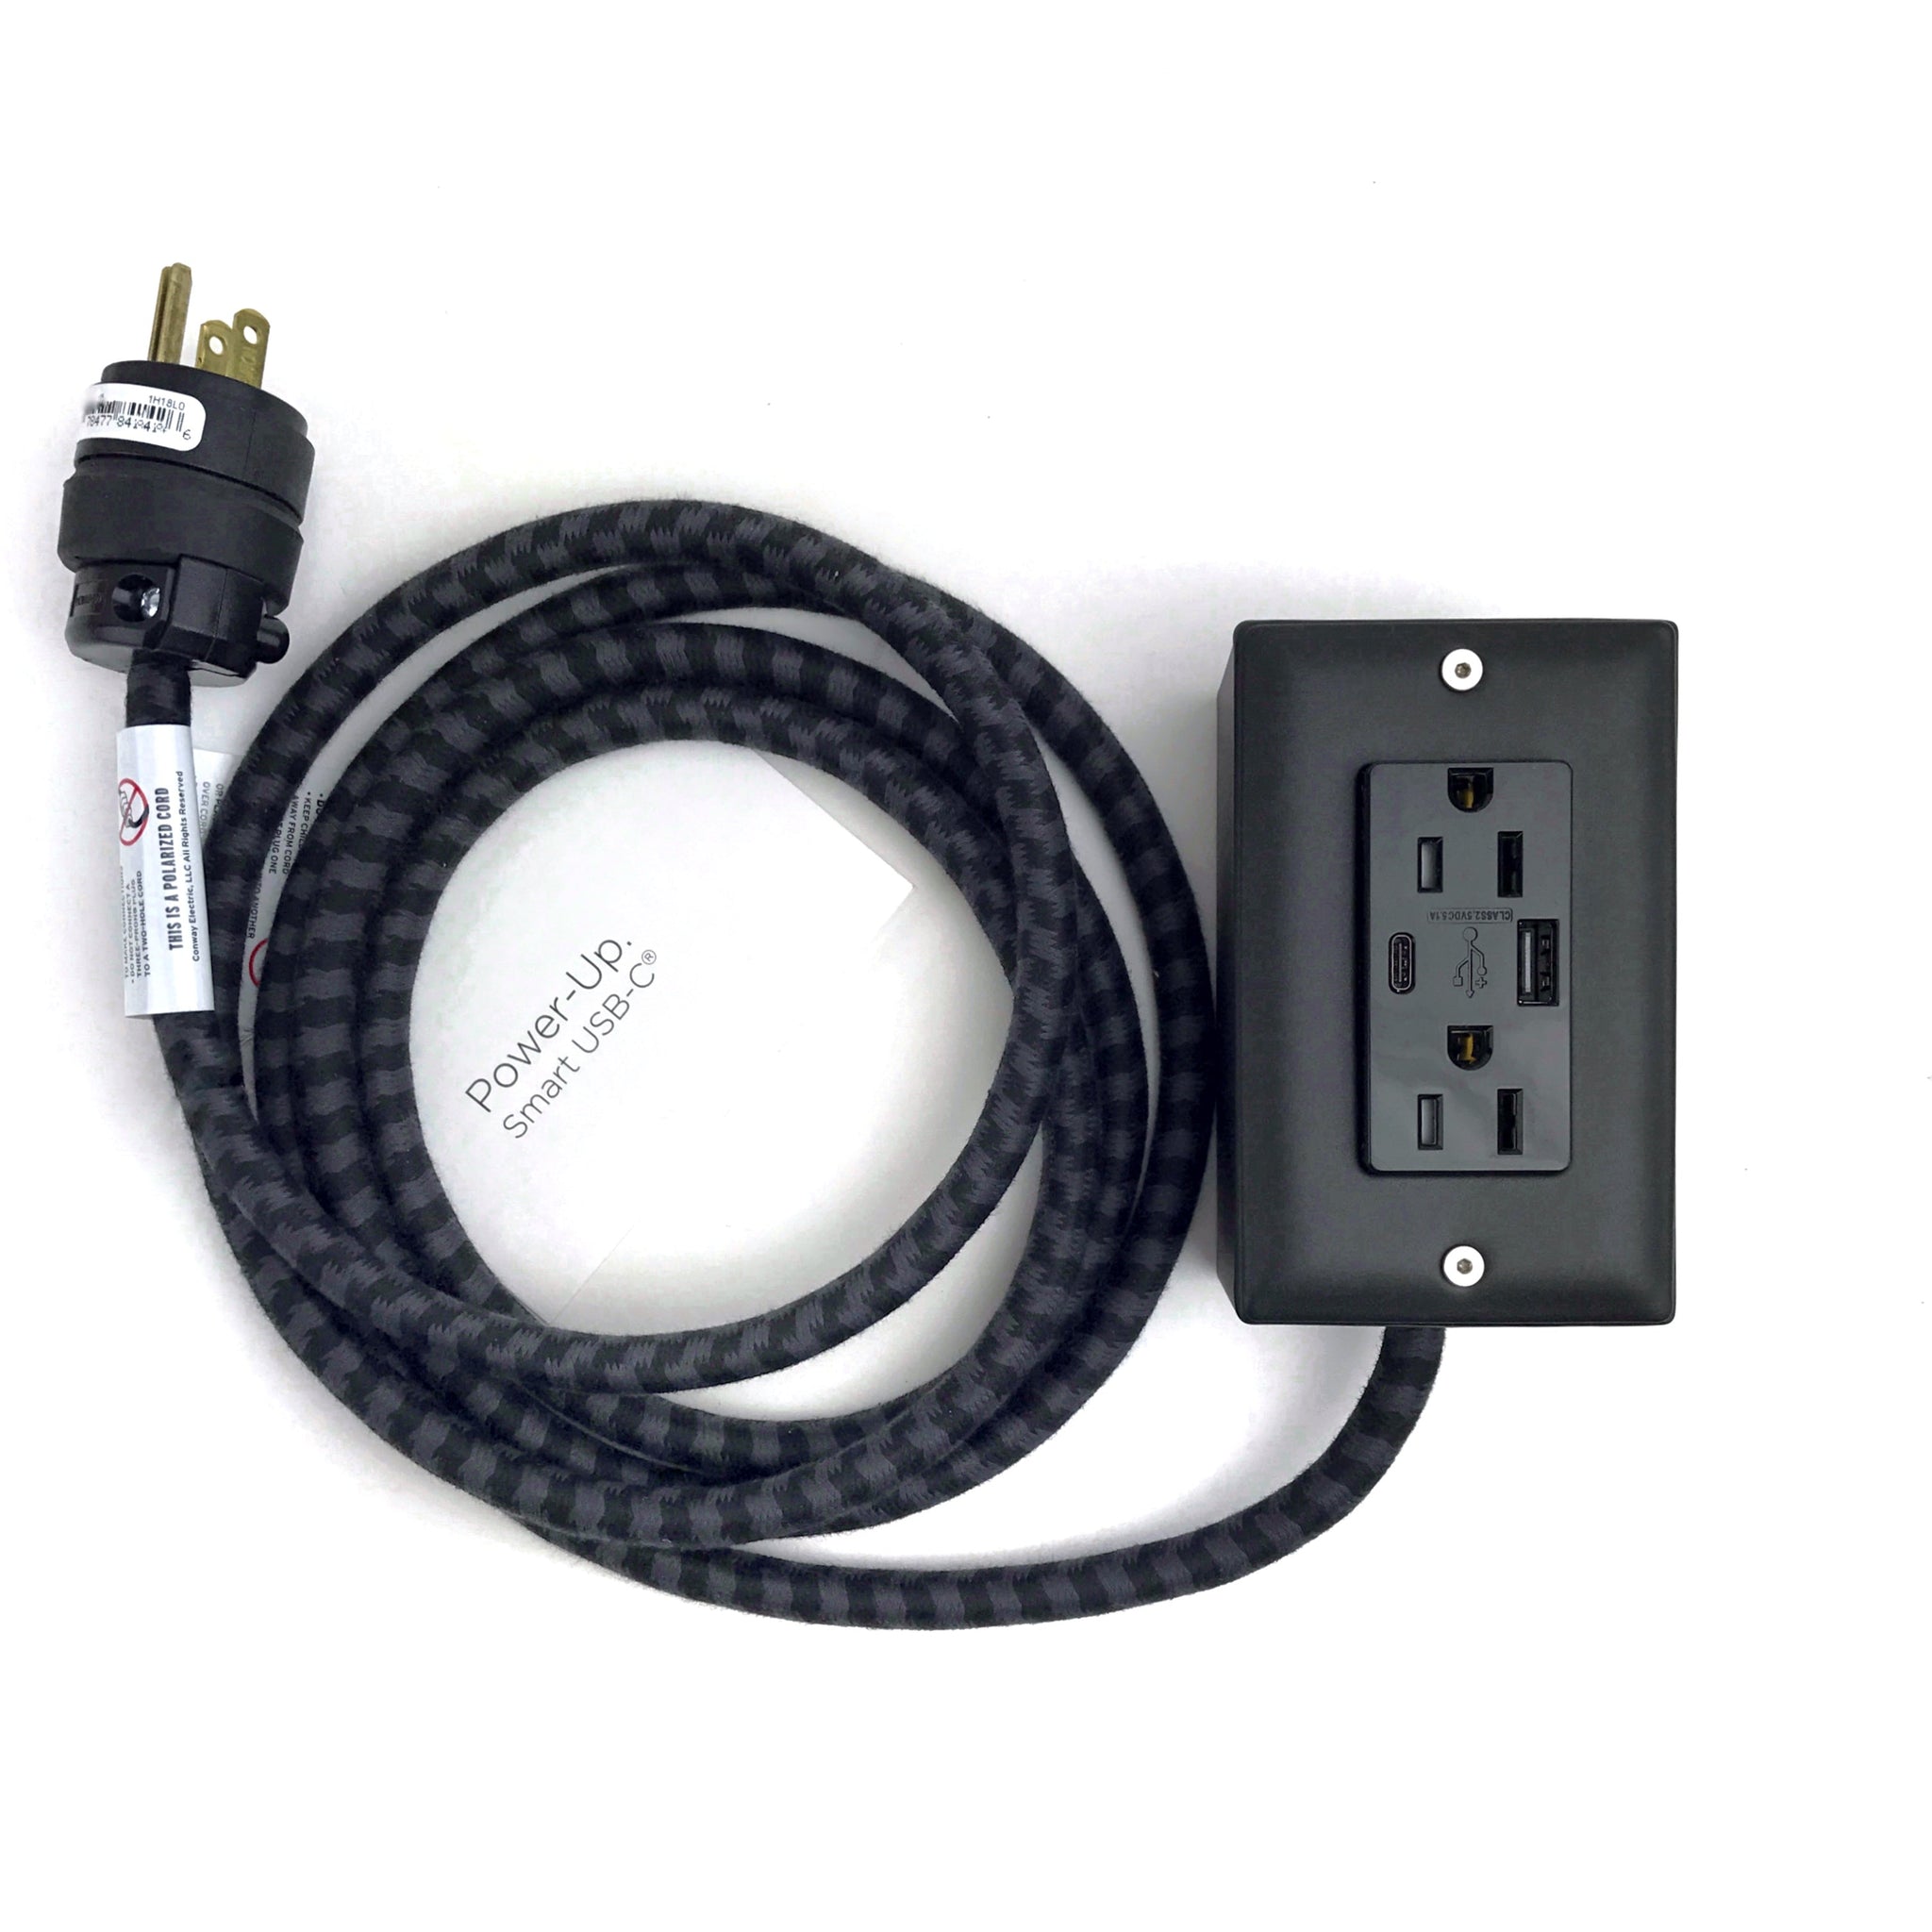 New! The First Smart Chip USB Type C® Carrara Black Extension Cord - 8FT Extō USBA/USBC Port, Dual-Outlet Power Cord